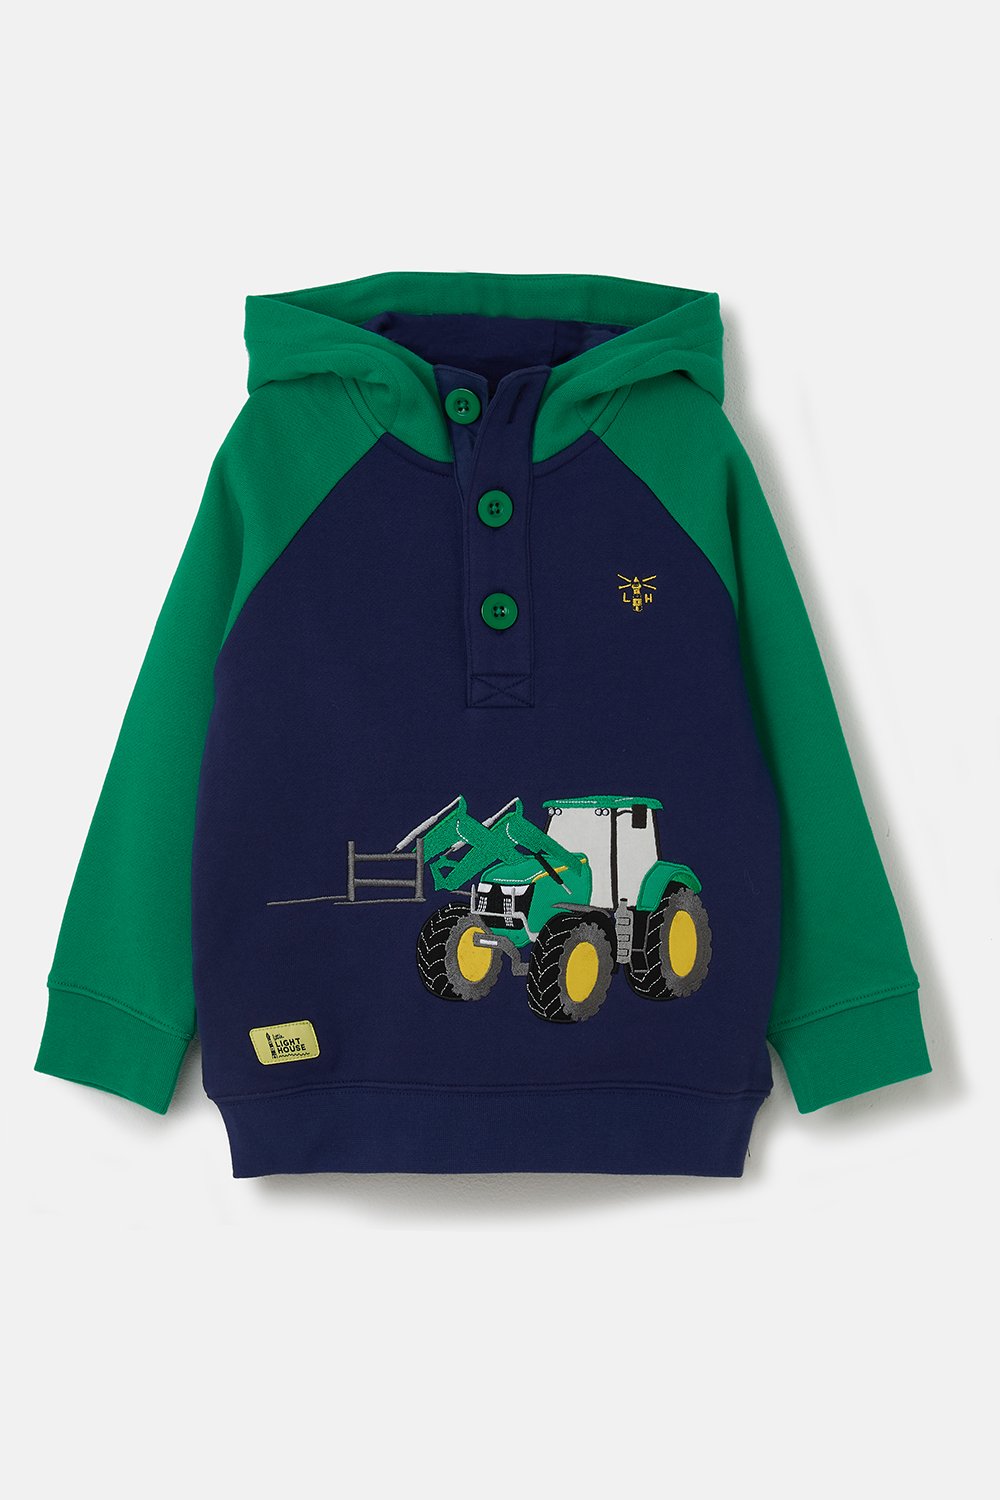 Lighthouse Jack Hoodie with Tractor Front Loader Applique - Green & Navy